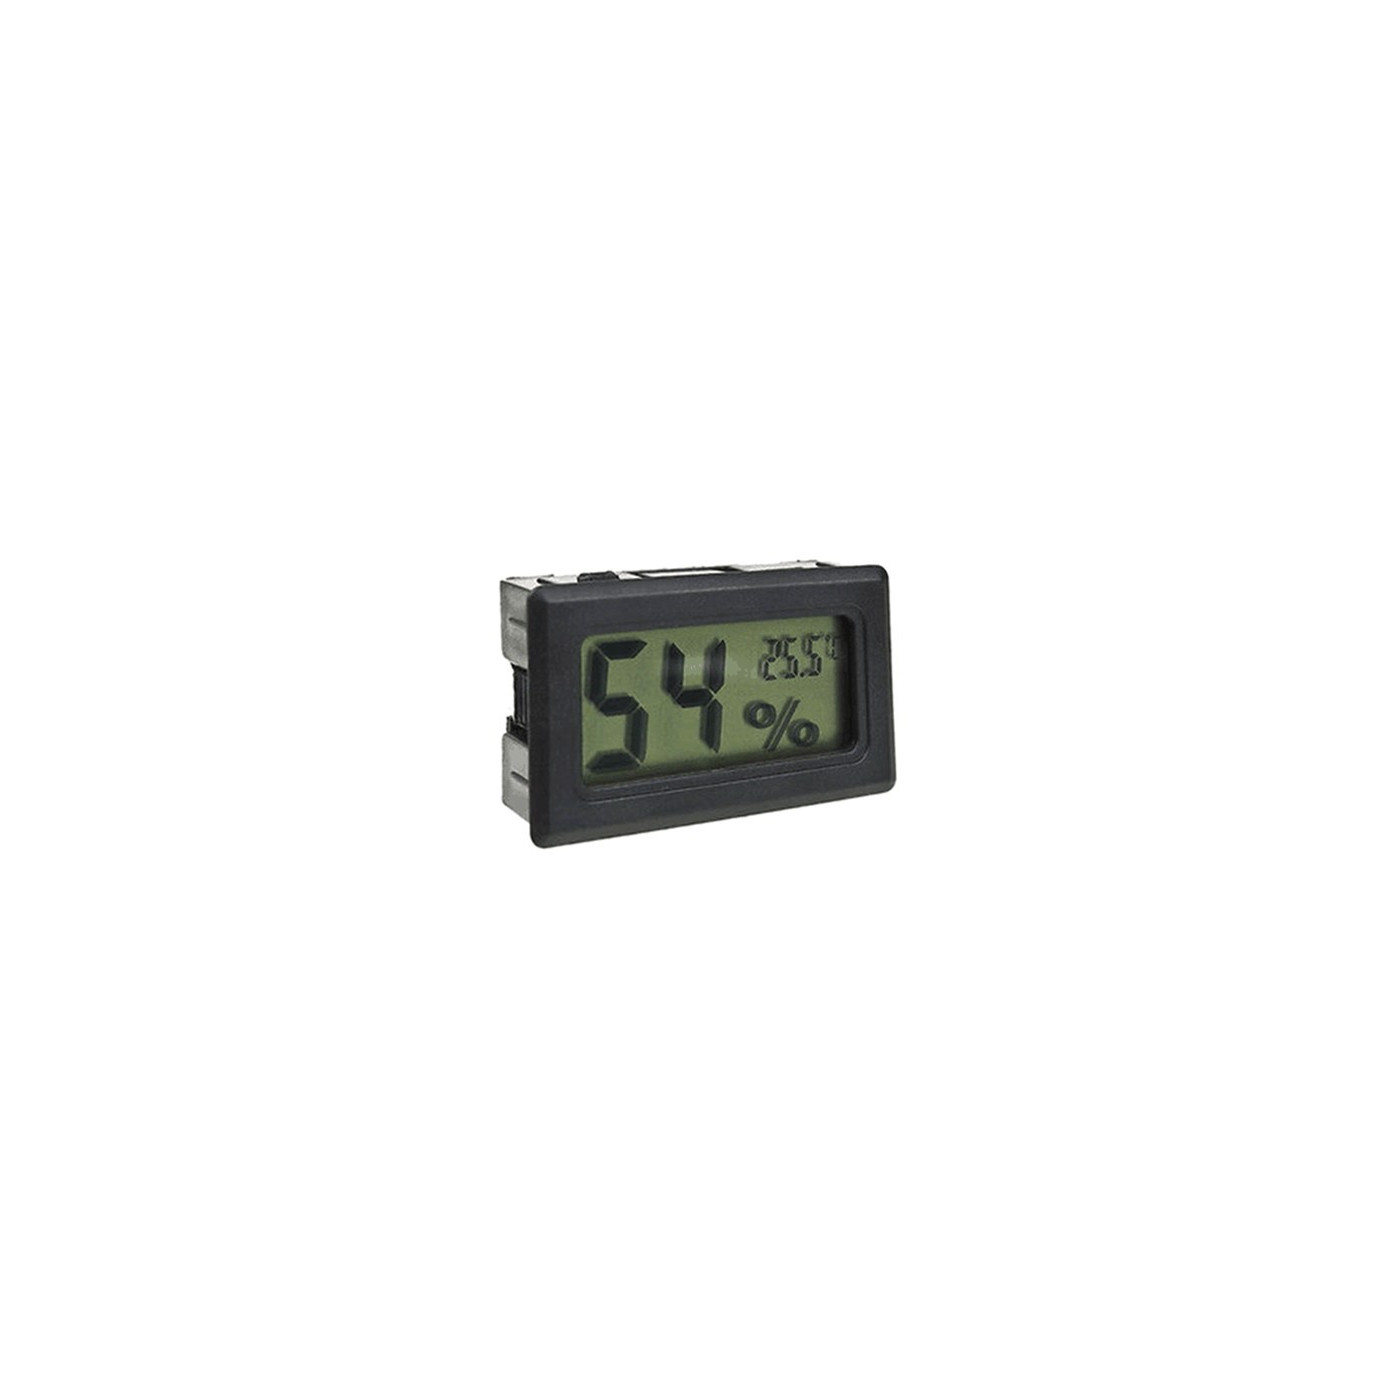 LCD indoor temperature and humidity meter (black)